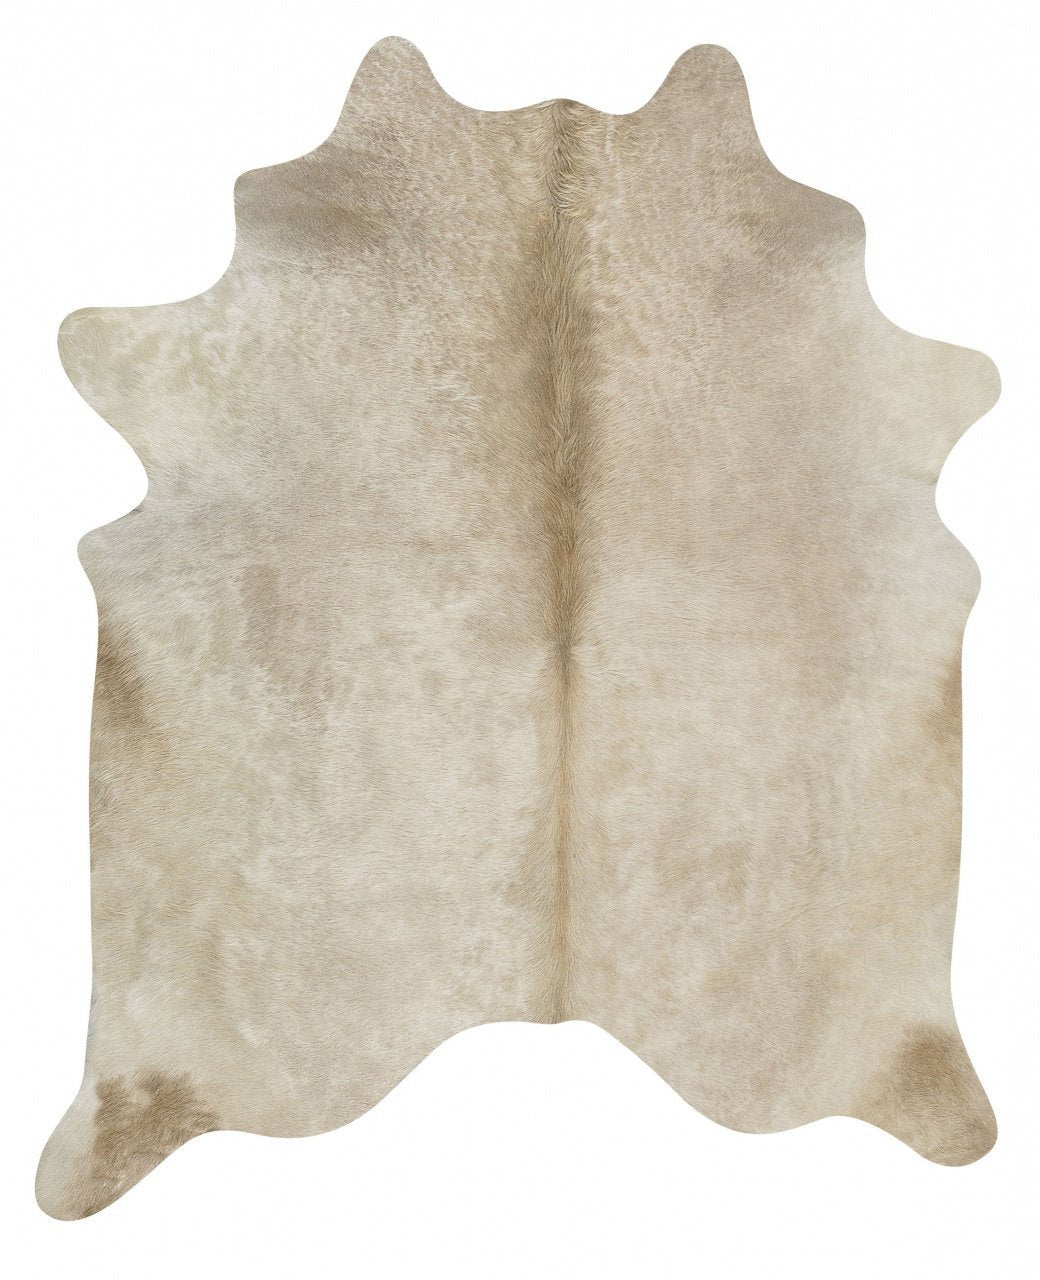 Exquisite Natural Cow Hide Rug Champagne - Newstart Furniture